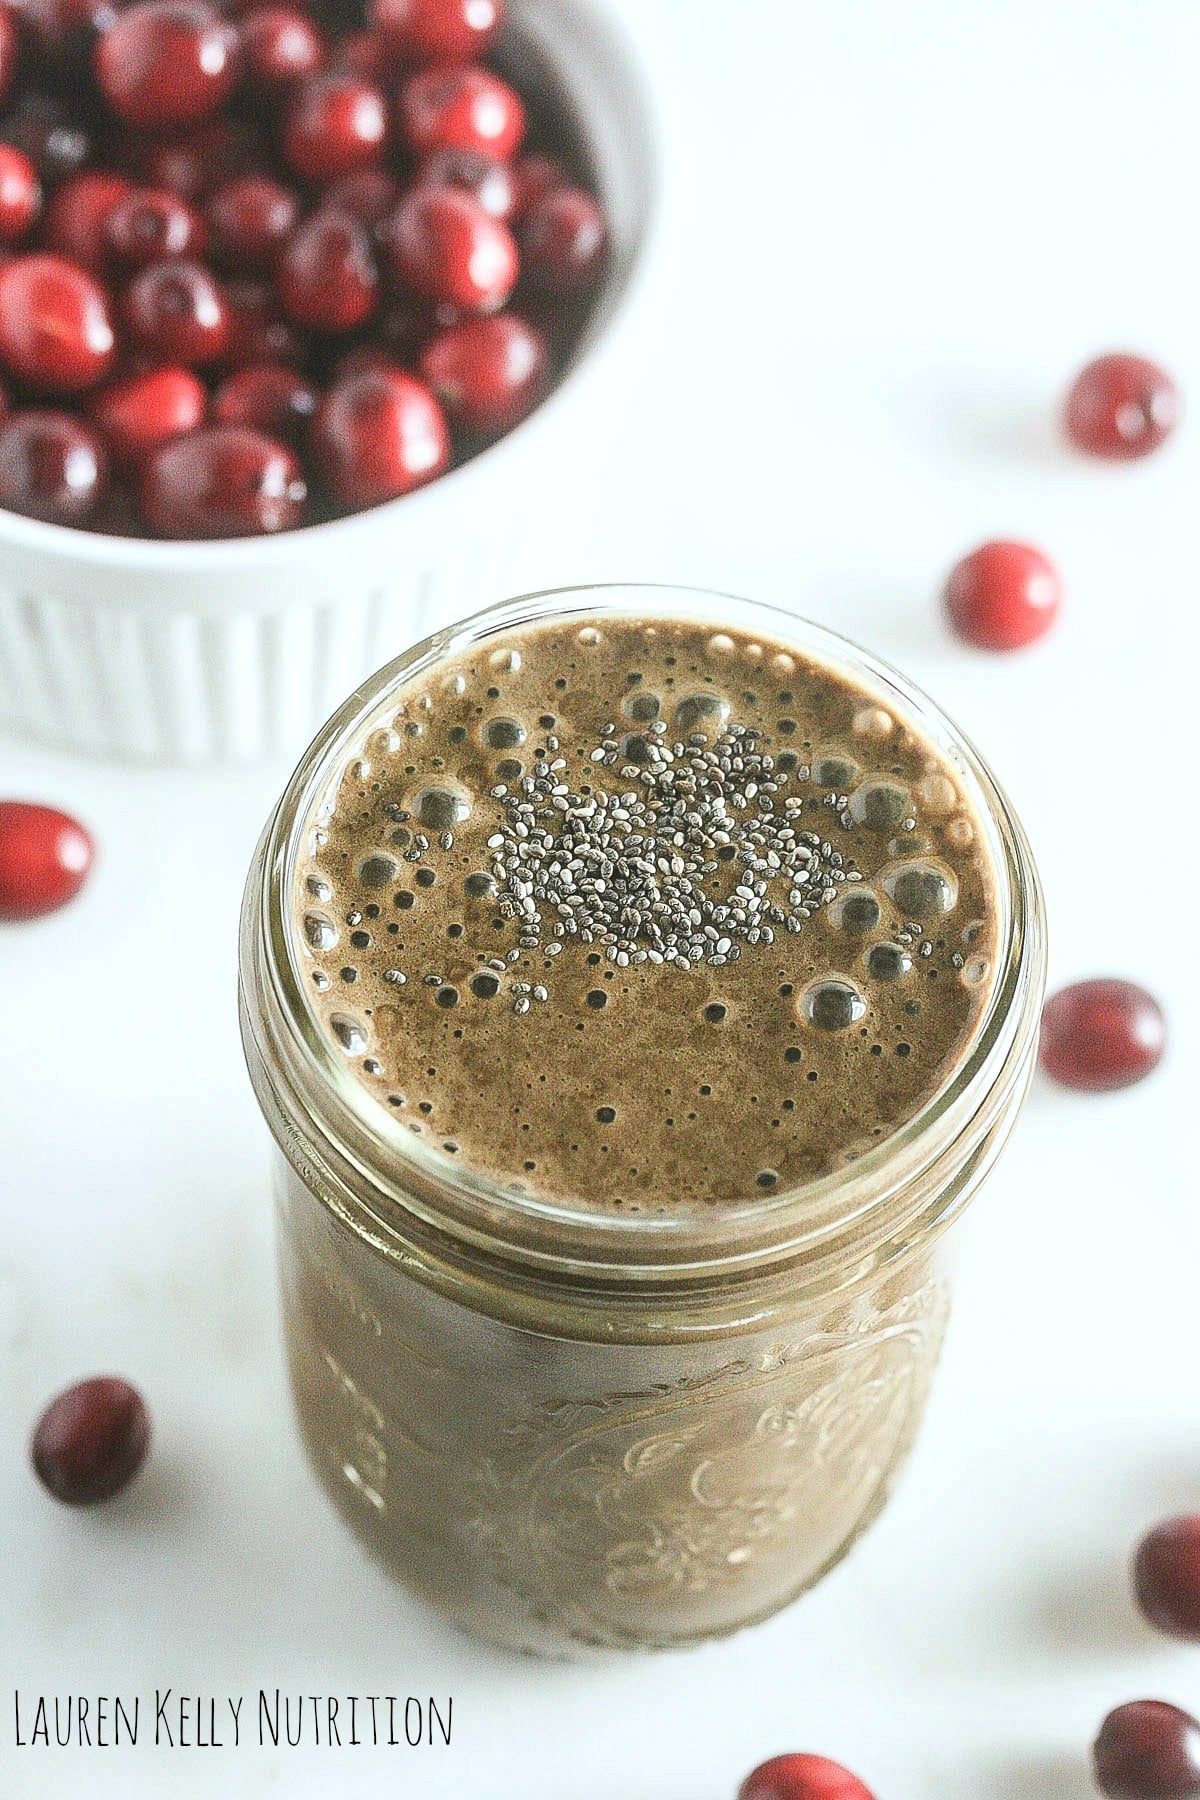 This Chocolate Cranberry Smoothie is packed with vitamins and antioxidants and is vegan, gluten-free and sugar-free! www.laurenkellynutrition.com